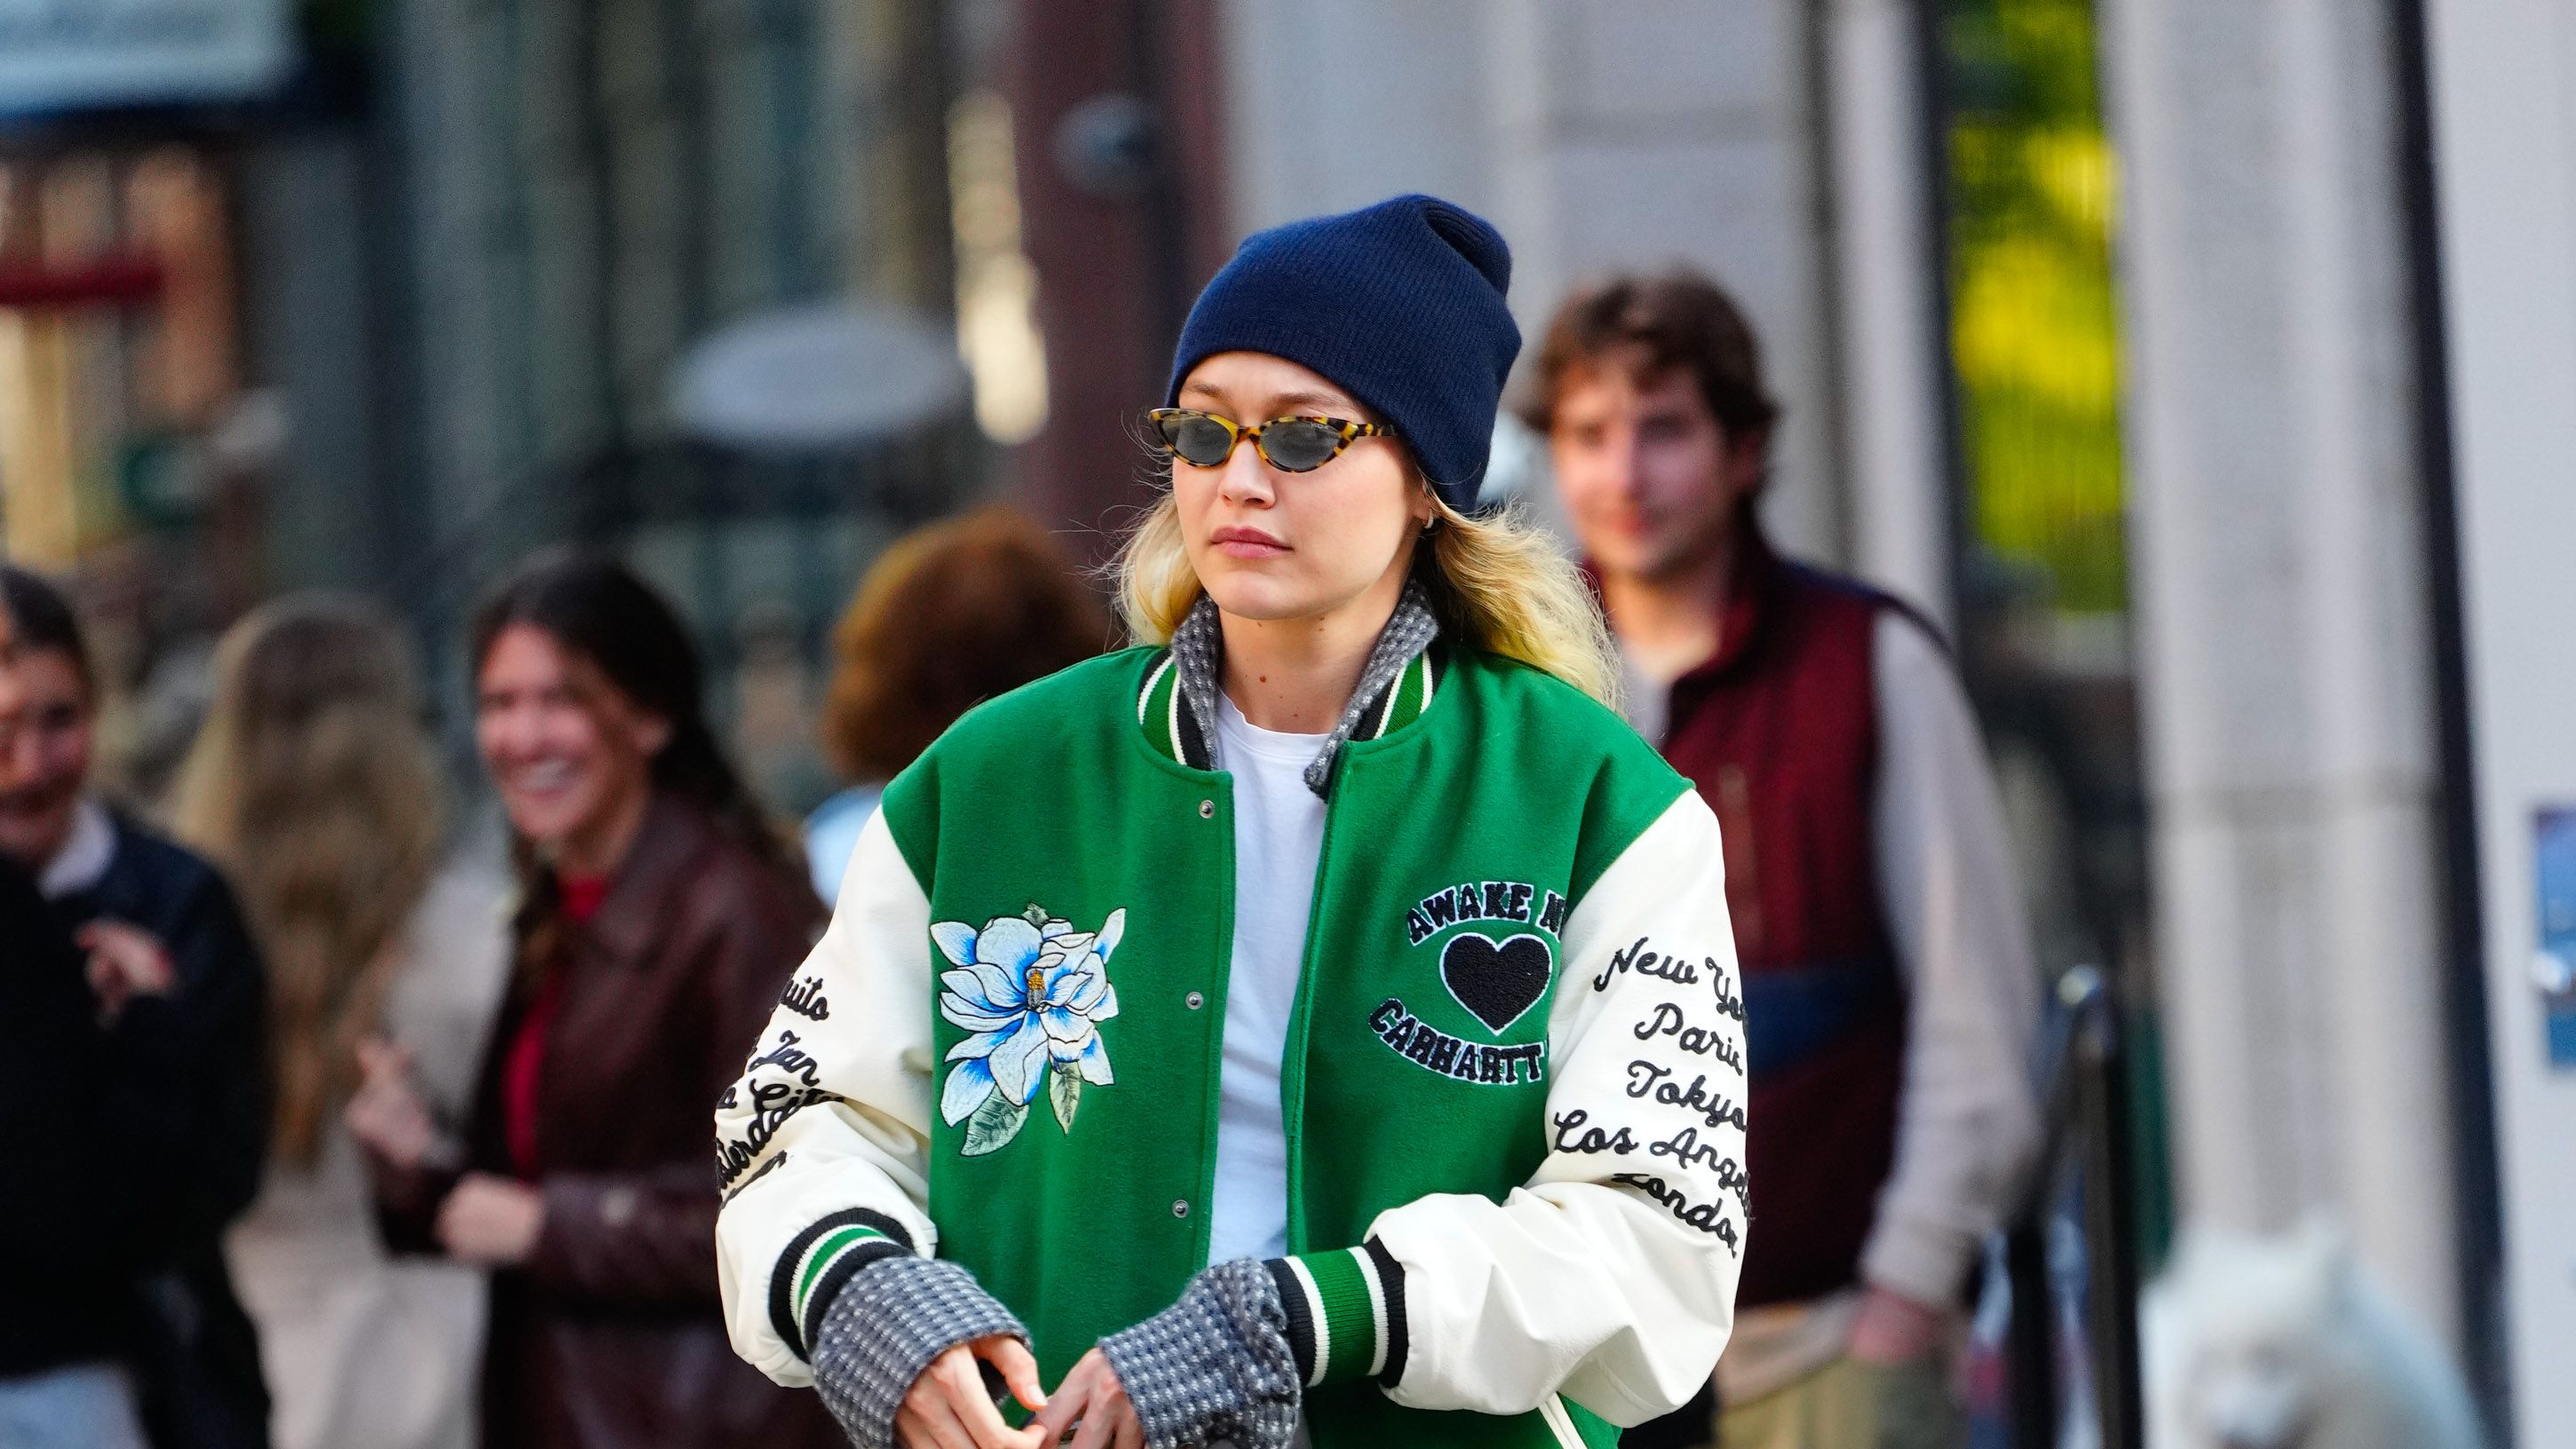 How Letterman Jackets Are Taking Over Paris Street Style